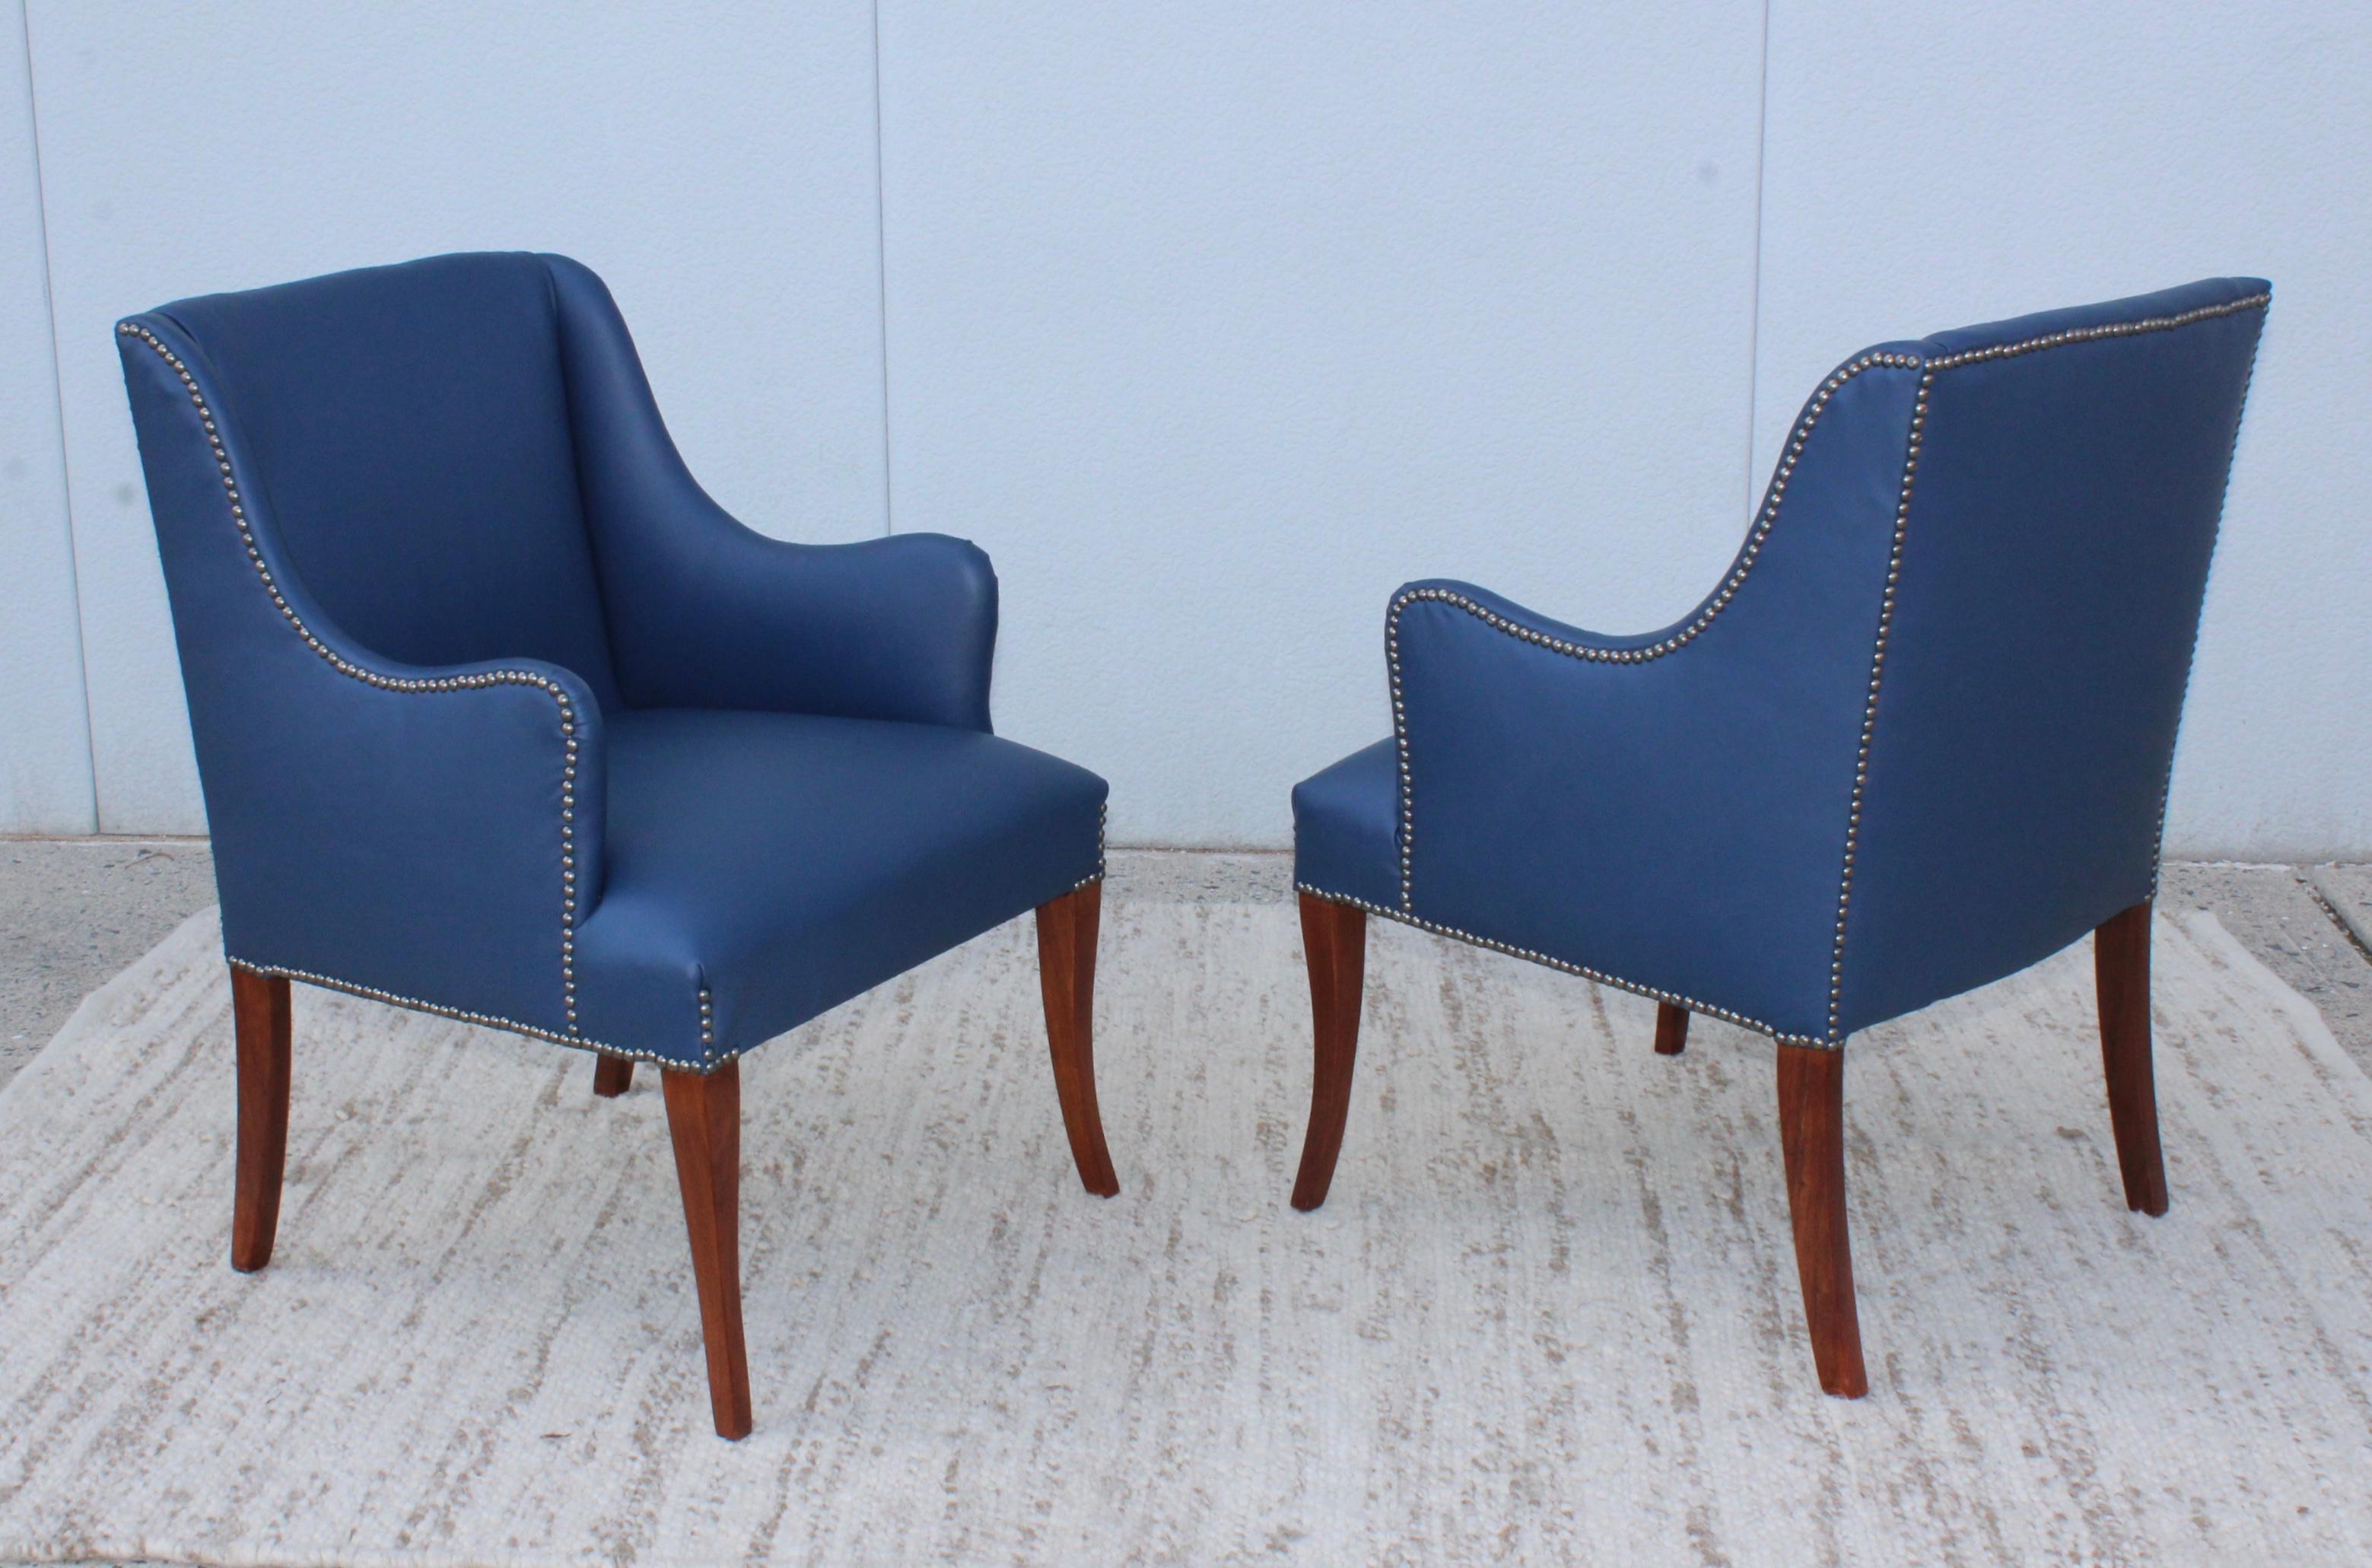 1960s modern blue leather lounge armchairs. Newly reupholstered in blue leather with walnut legs and brass nail detail.